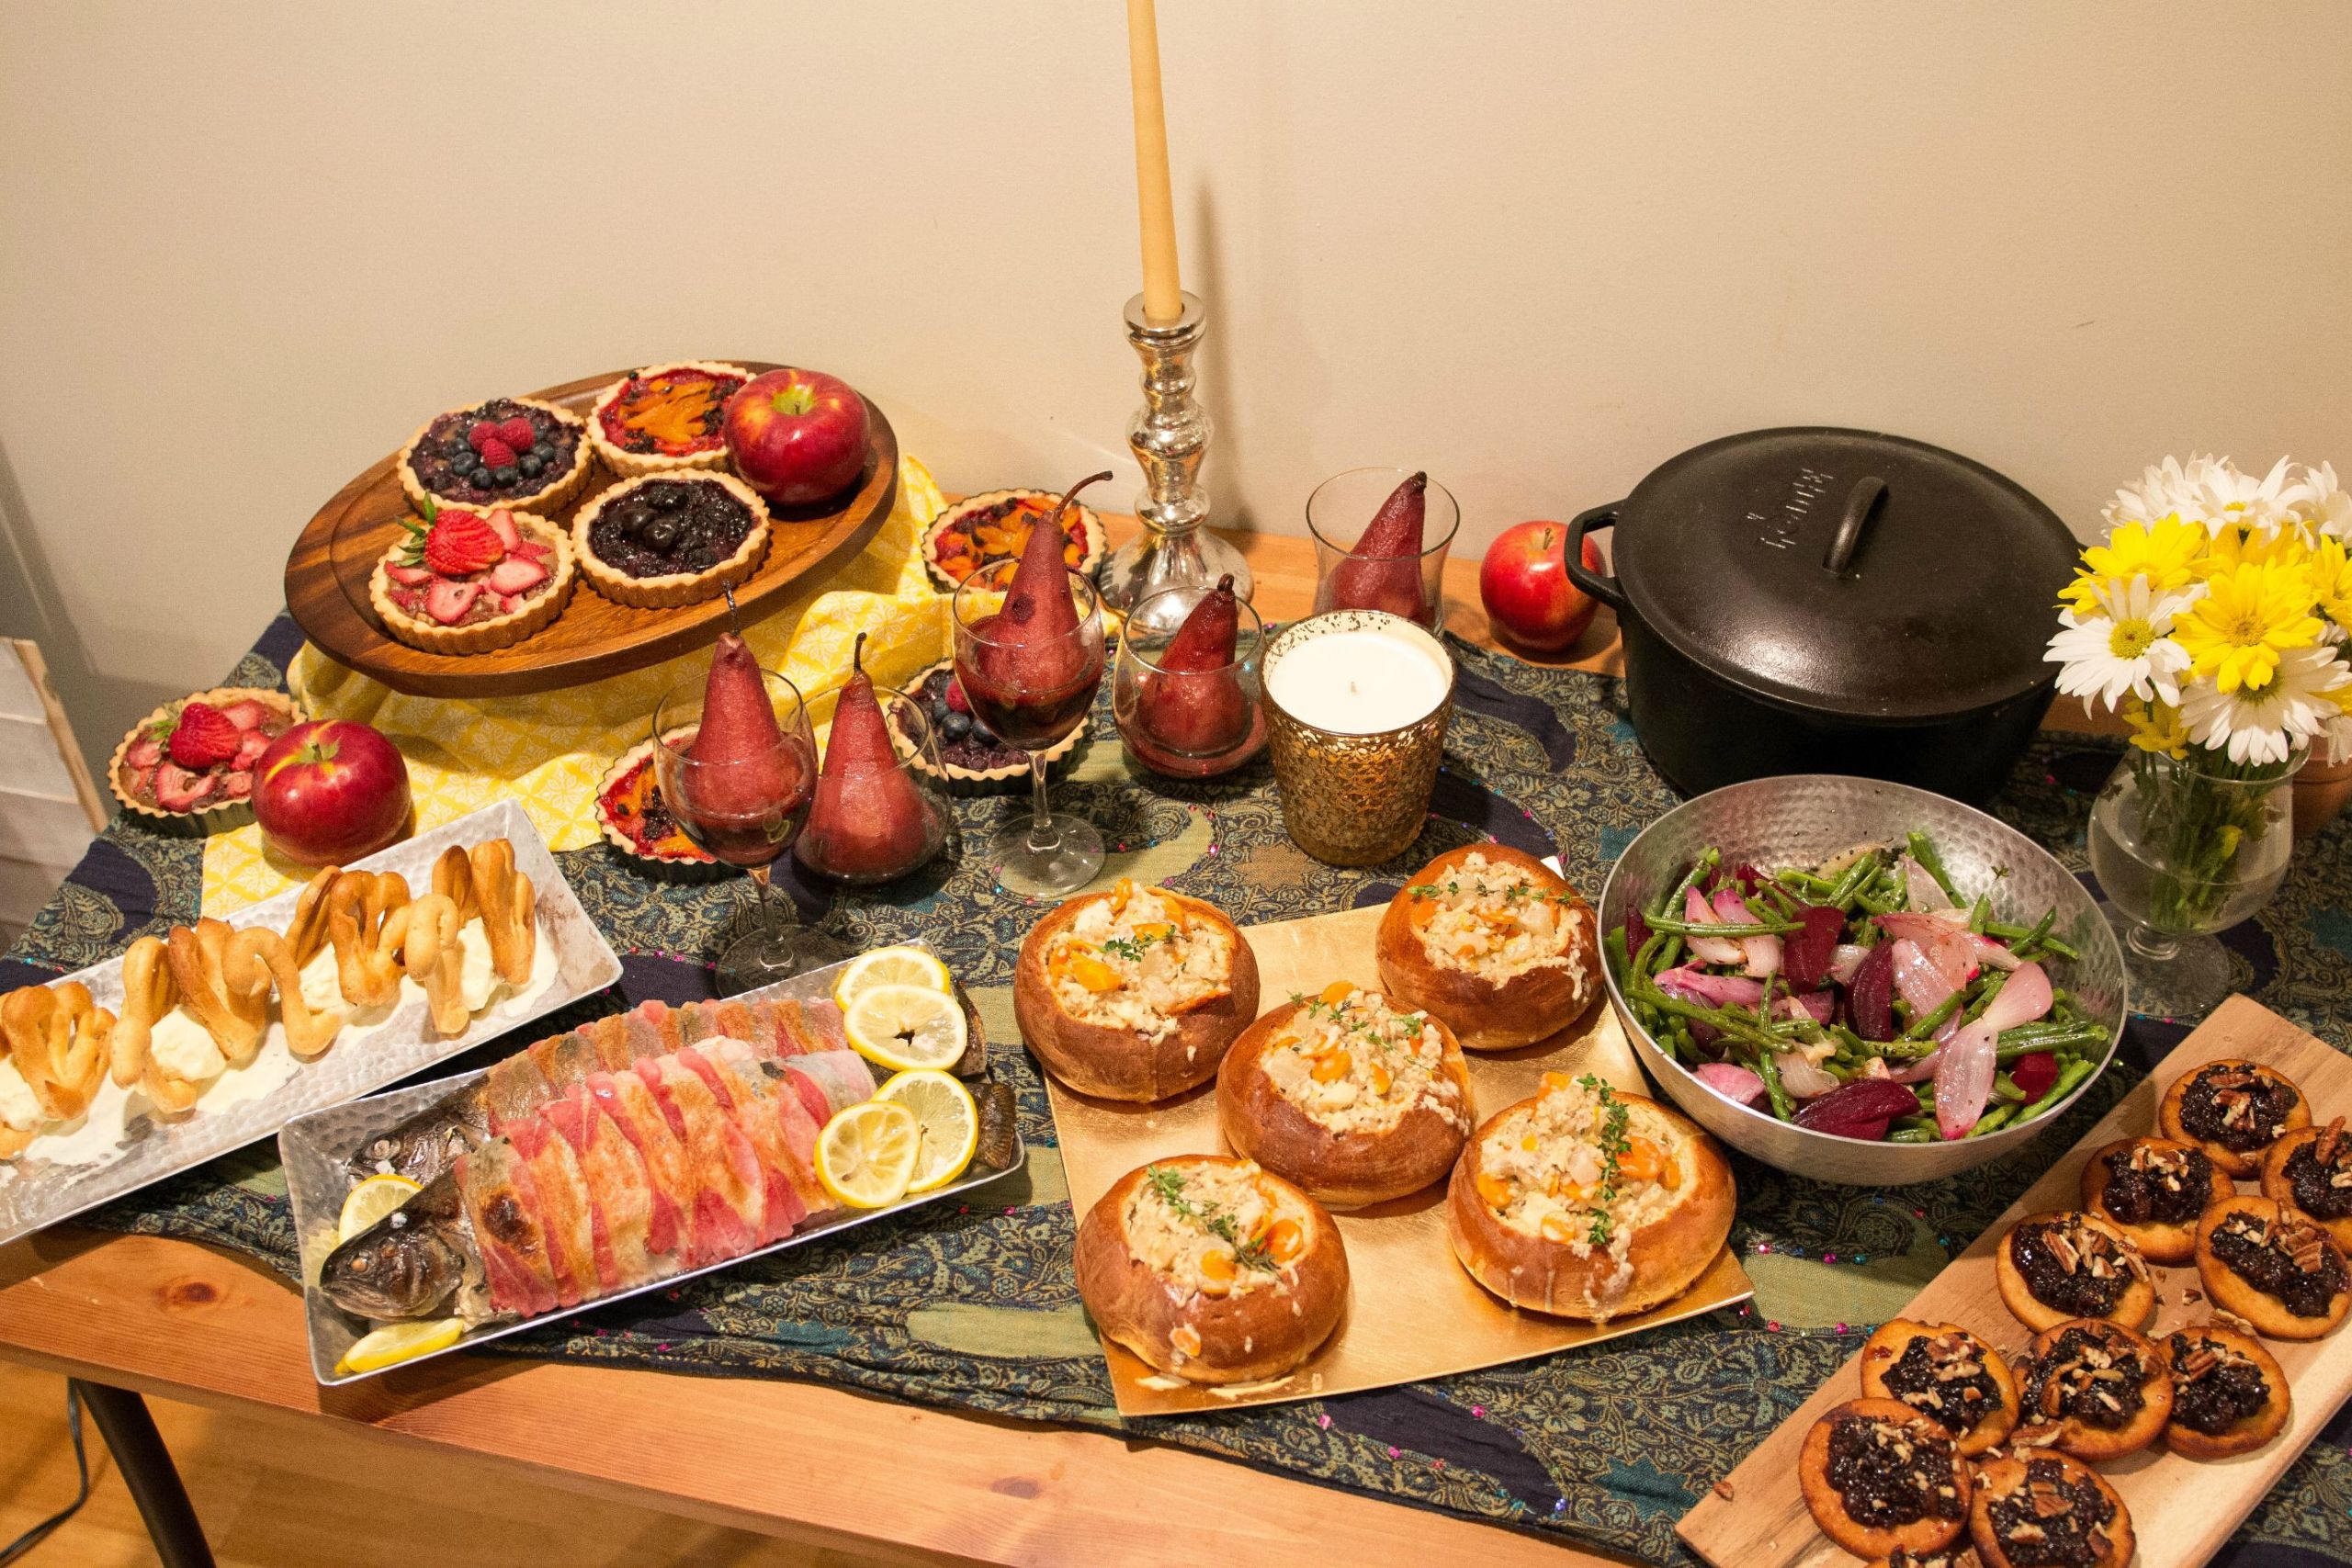 Game Of Thrones Party Food Ideas
 Fan is making a Games of Thrones feast for every region